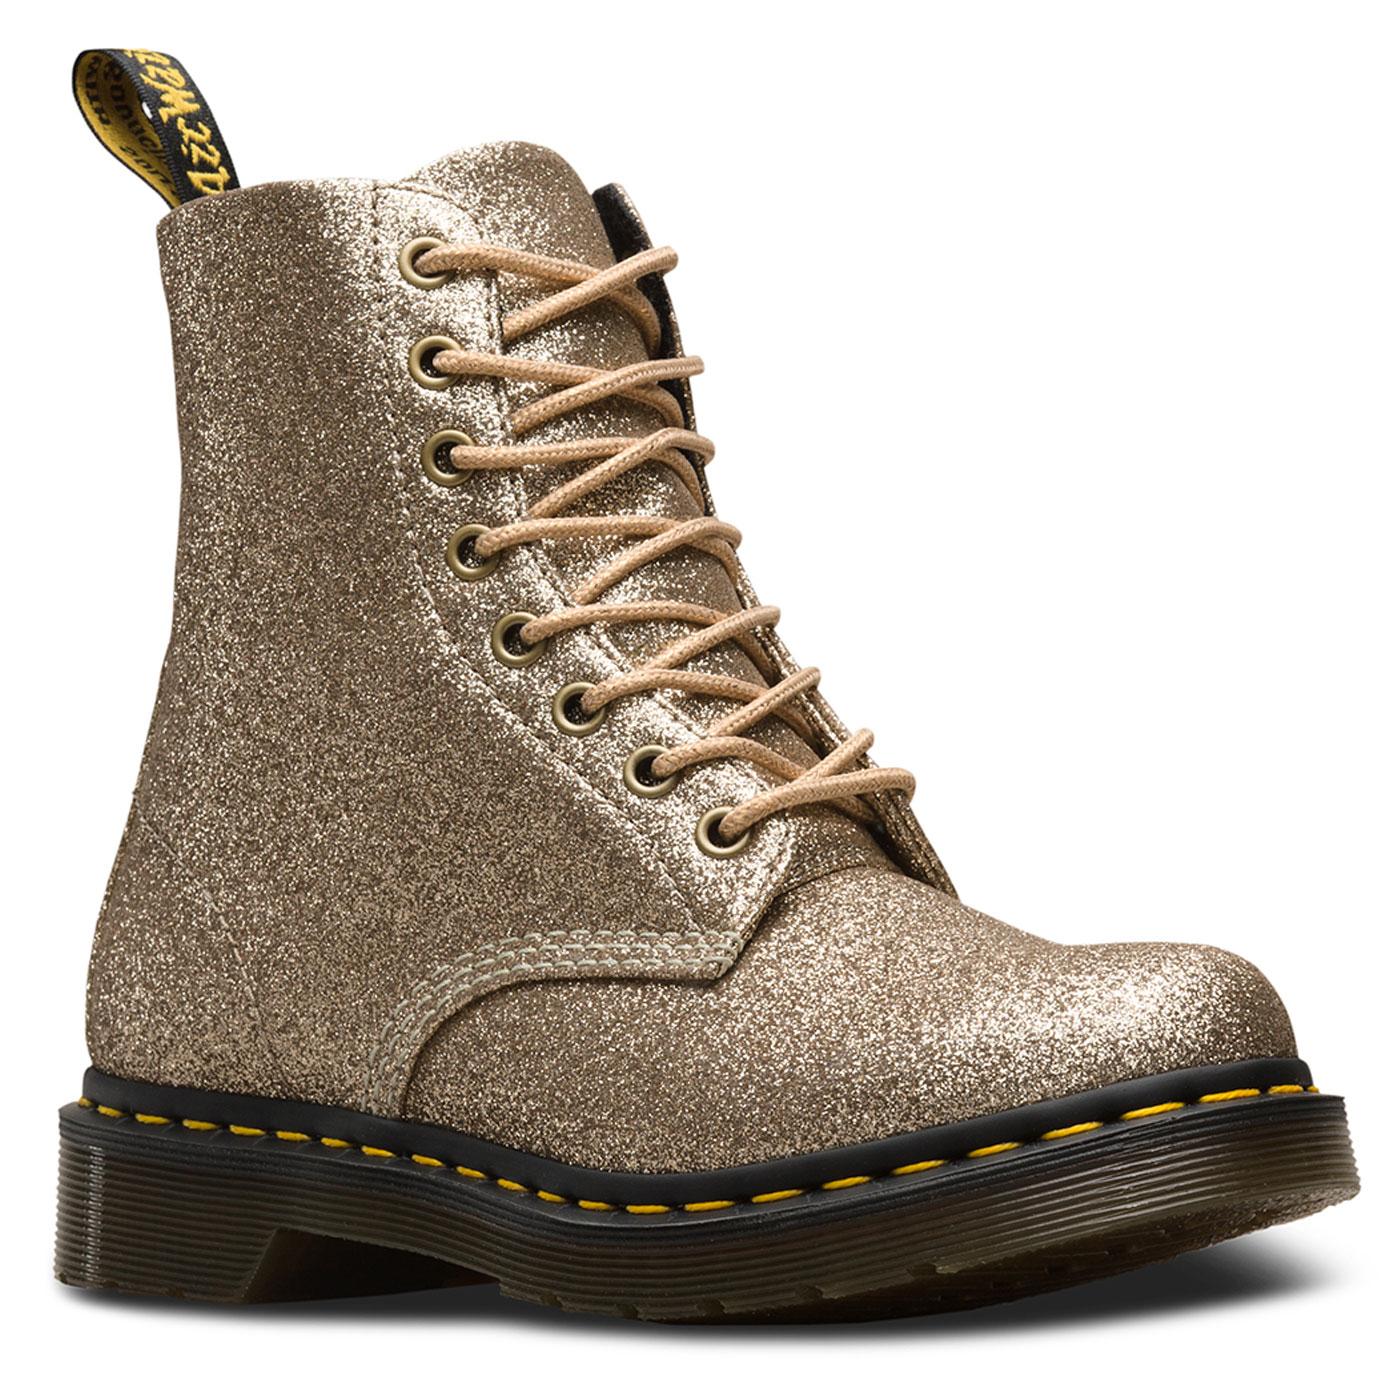 Pascal DR MARTENS 1460 Boots in Pale Gold Glitter